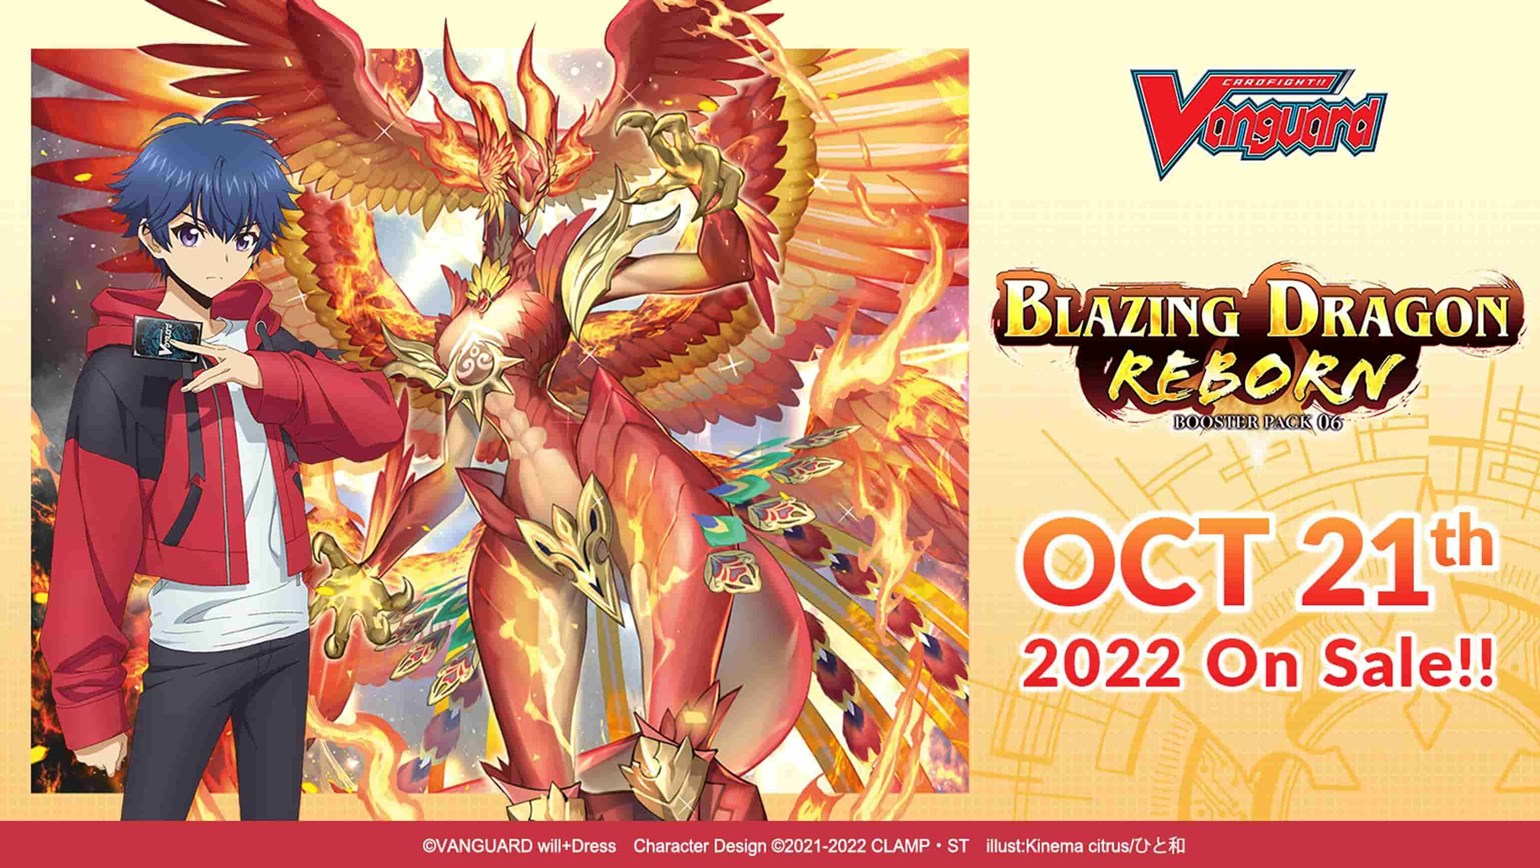 Turn up the heat of your cardfights with Booster Pack 06: Blazing Dragon Reborn, Coming to Stores on October 21st!